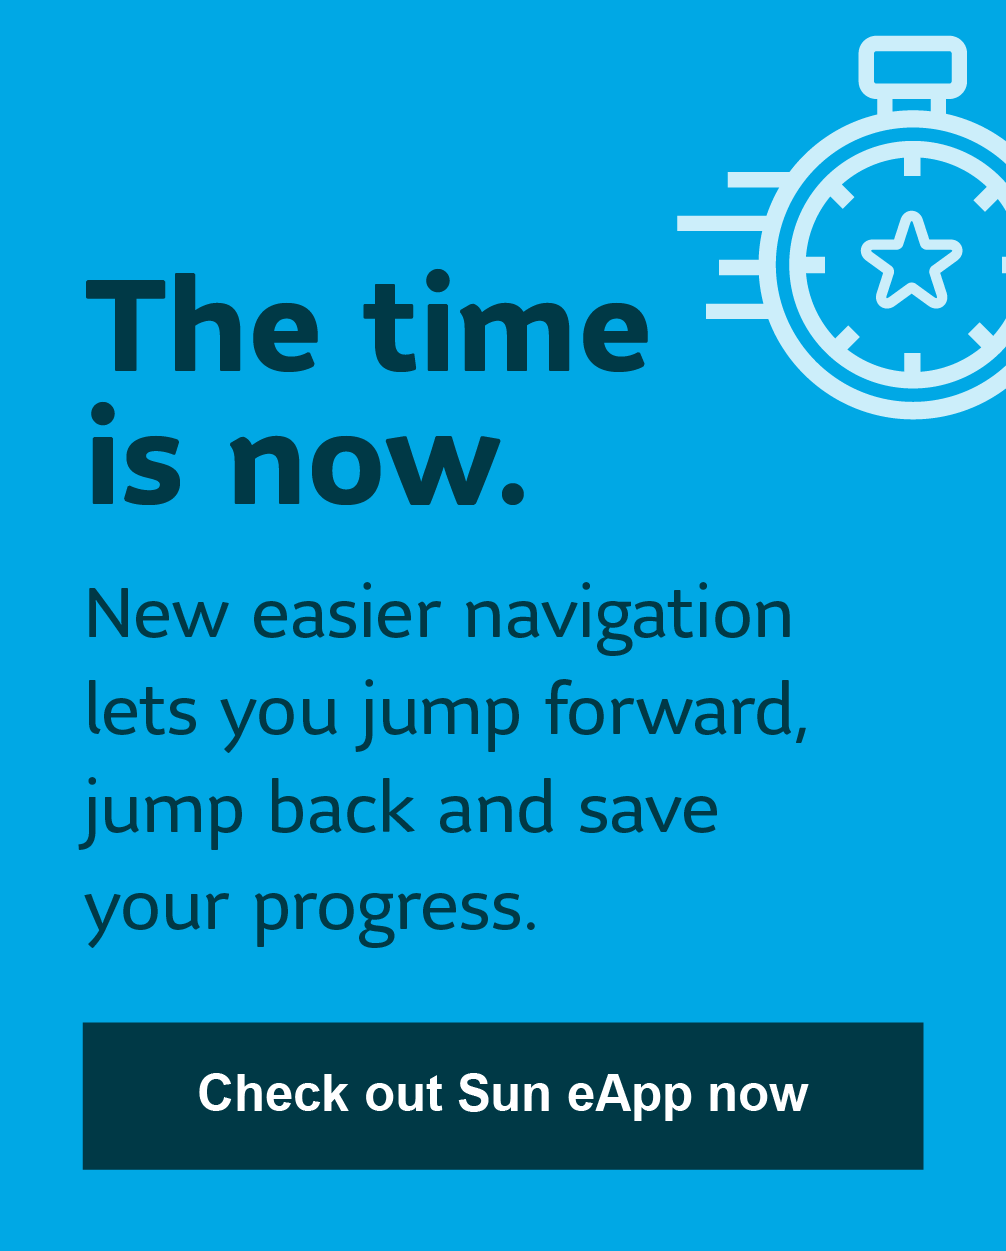 Sun eApp has new upgrades that make doing business a snap.